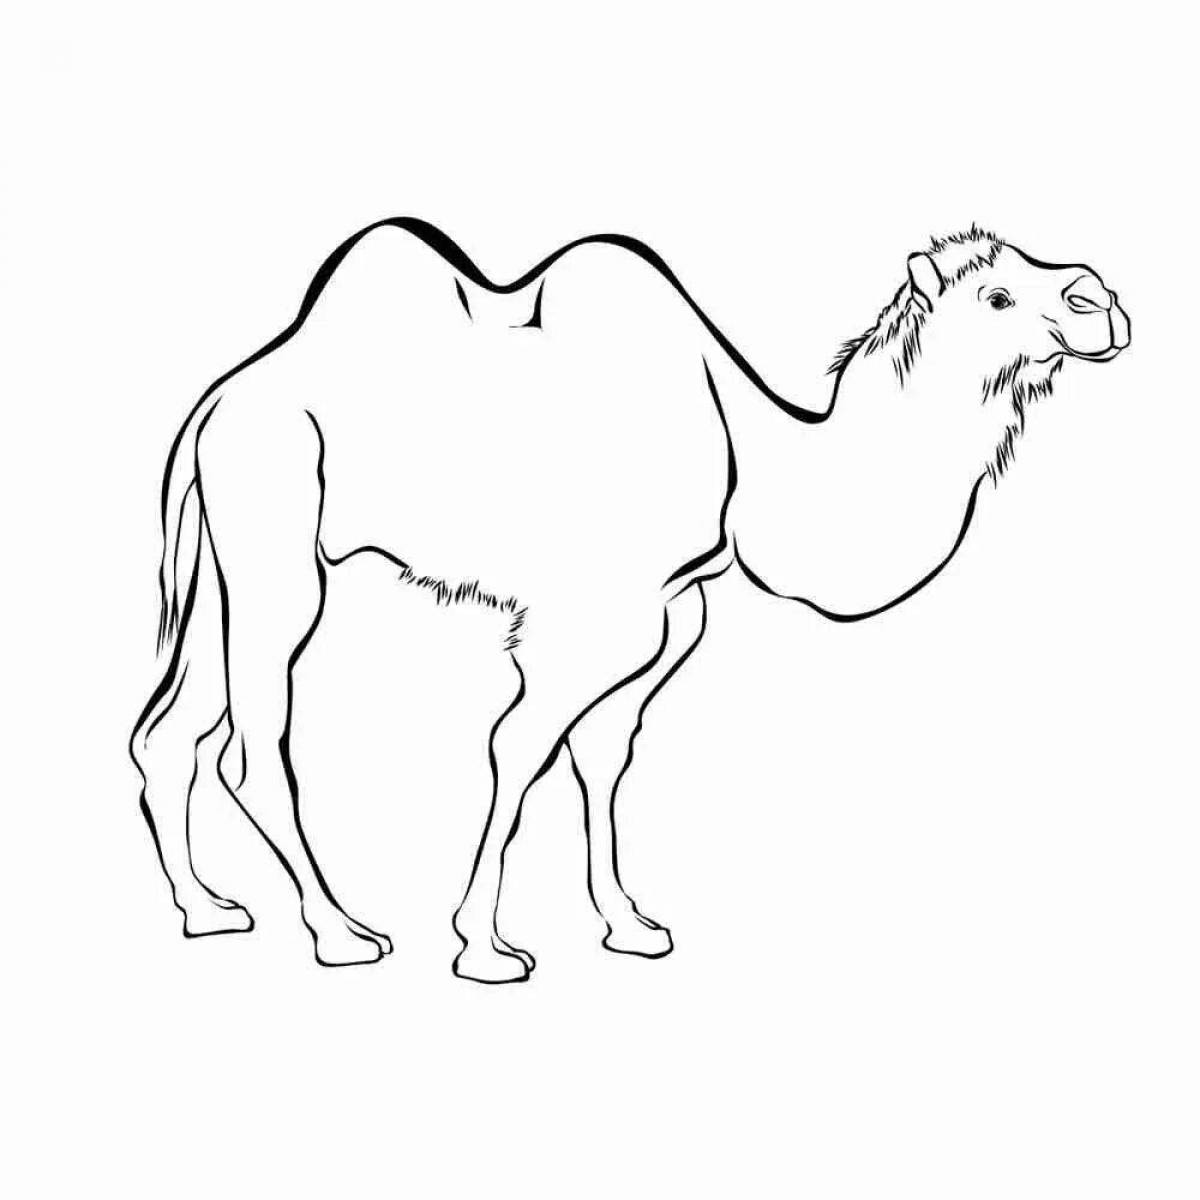 Fabulous camel coloring book for children 6-7 years old